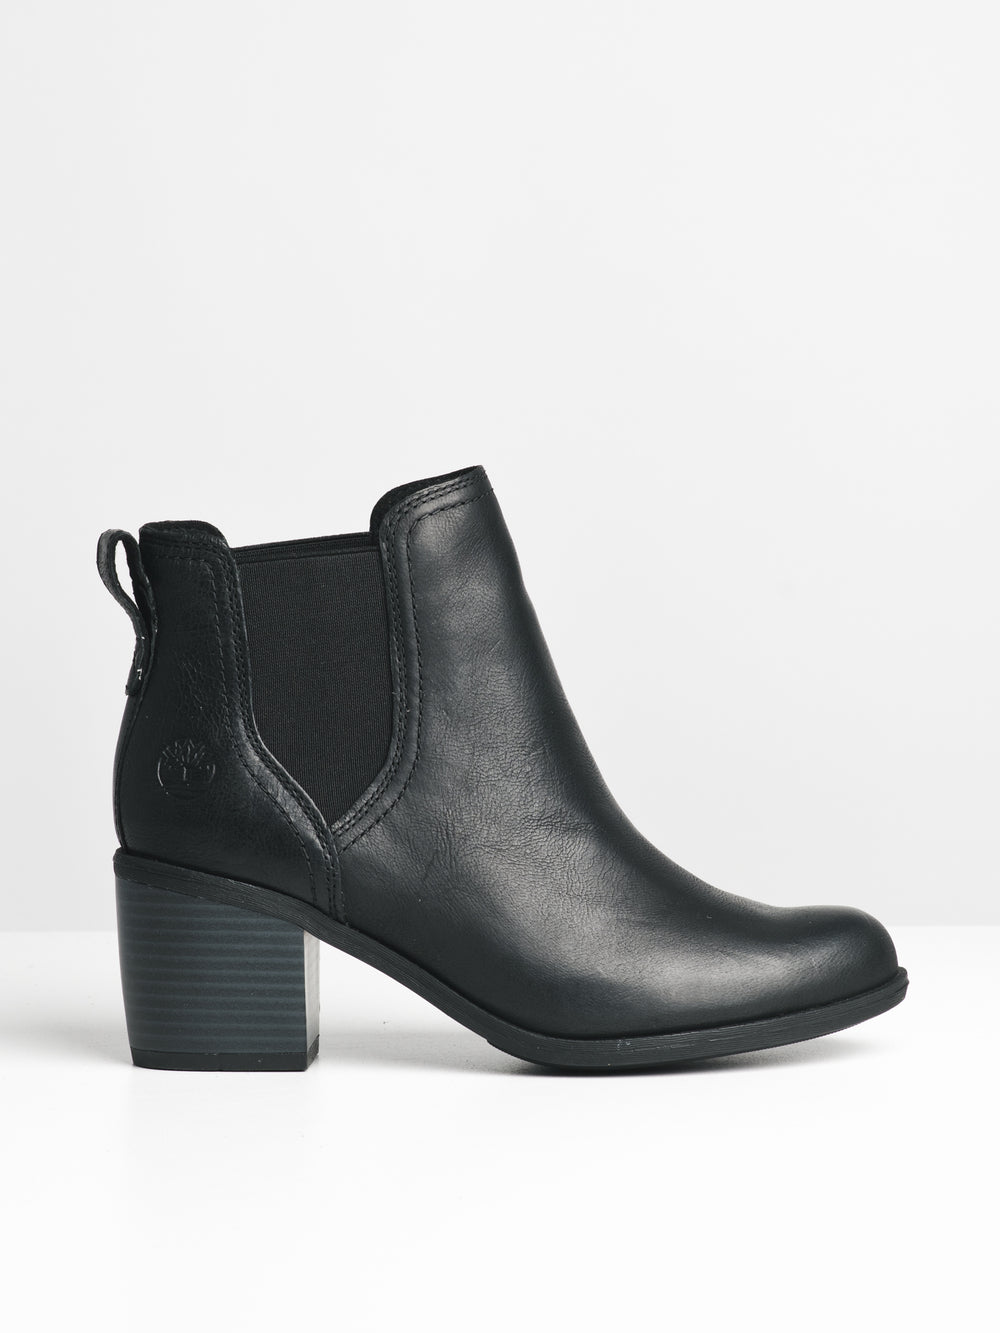 BRYNLEE PARK CHELSEA POUR FEMME - BLK - CLEARANCE